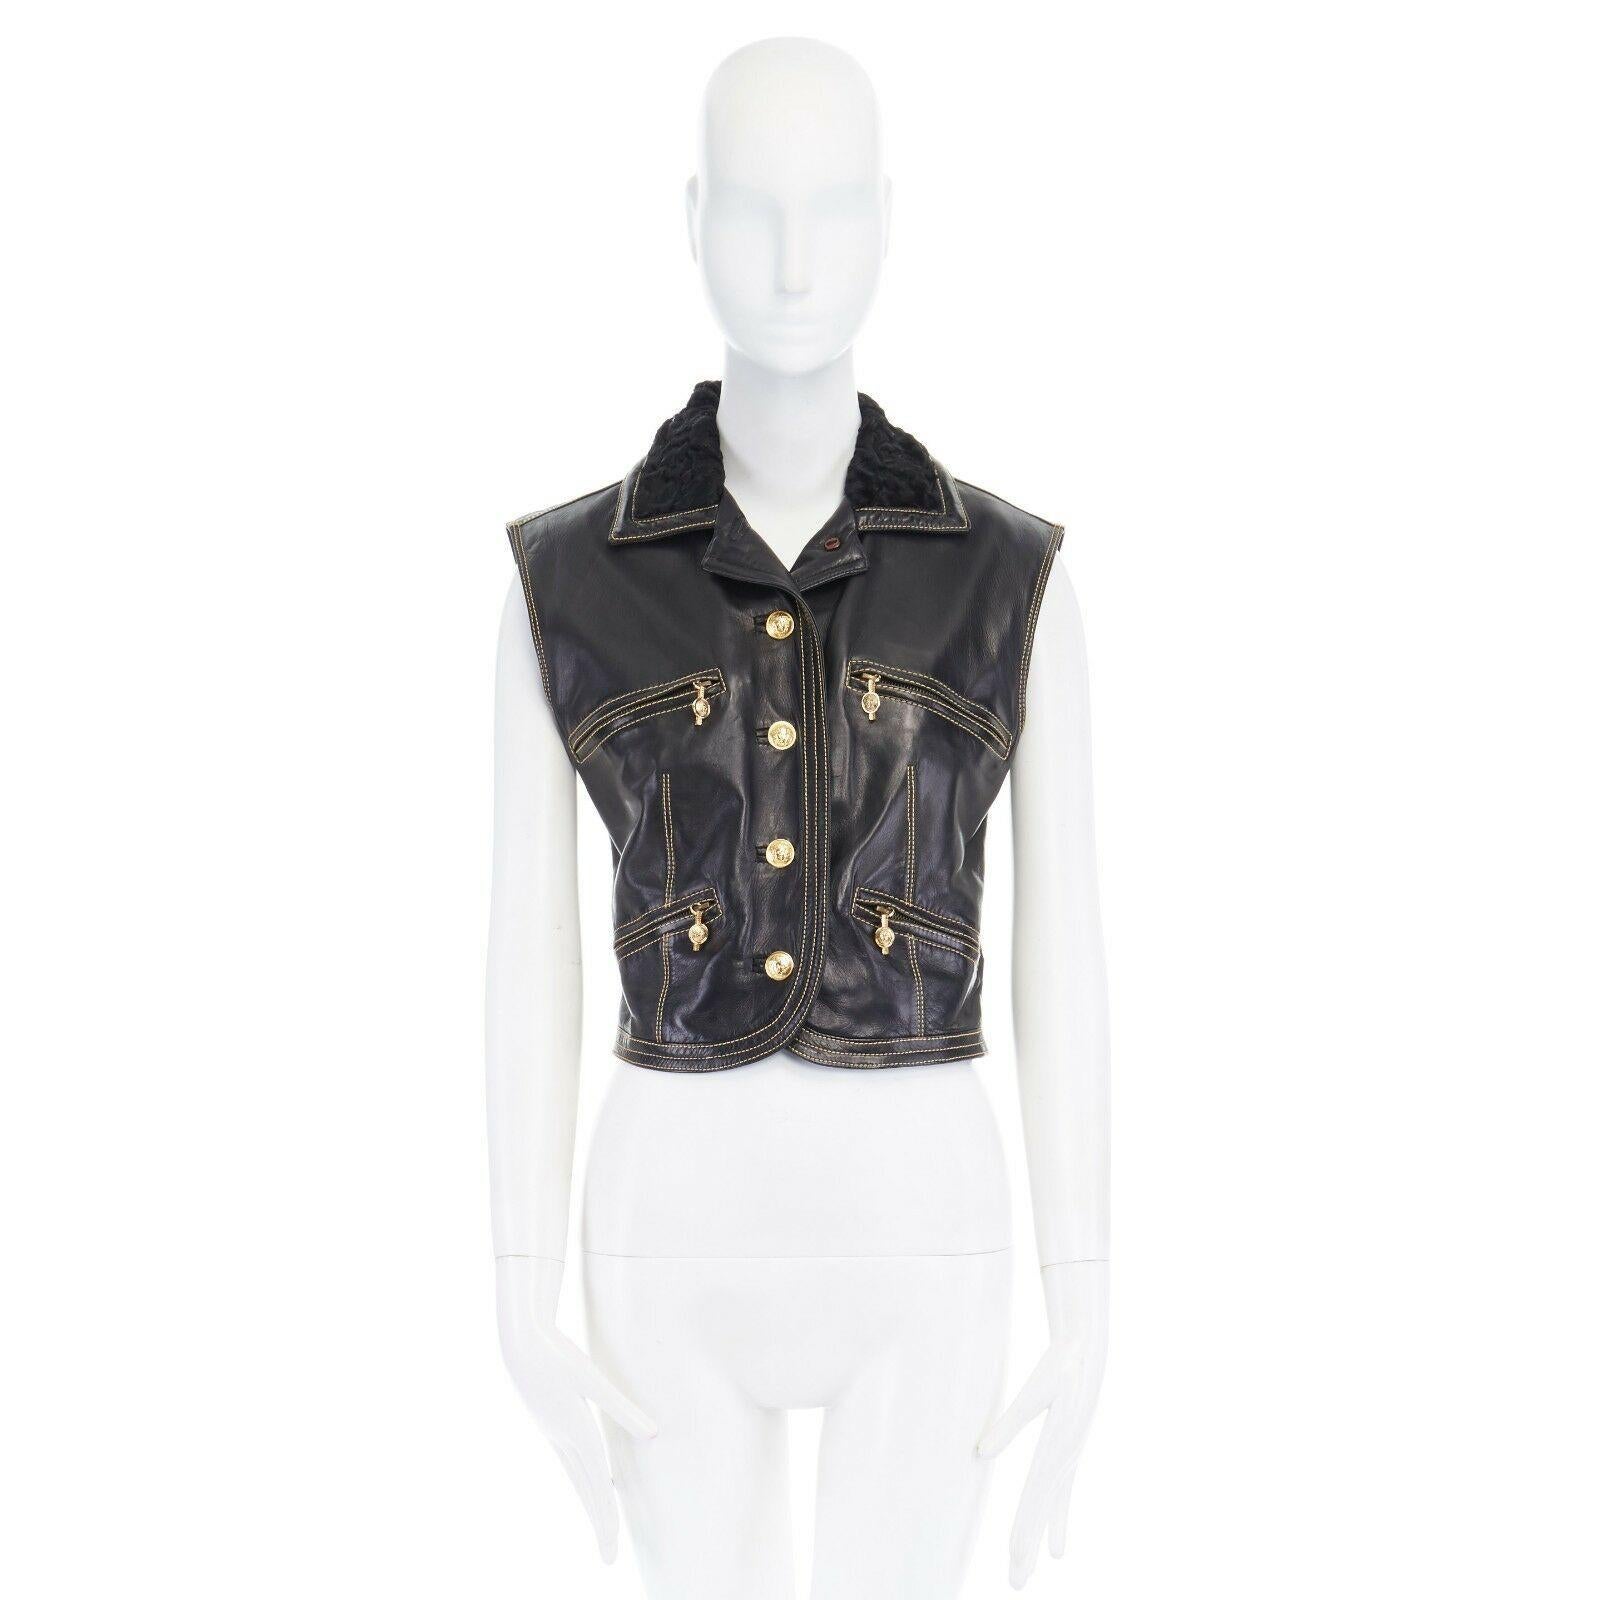 runway GIANNI VERSACE AW92 Miss SM black fur collar leather Medusa vest jacket S

GIANNI VERSACE
FROM THE FALL WINTER 2002 MISS S&M RUNWAY/CAMPAIGN
Black leather . Soft lambskin leather . Shearling fur collar . 
Contrast yellow stitching throughout